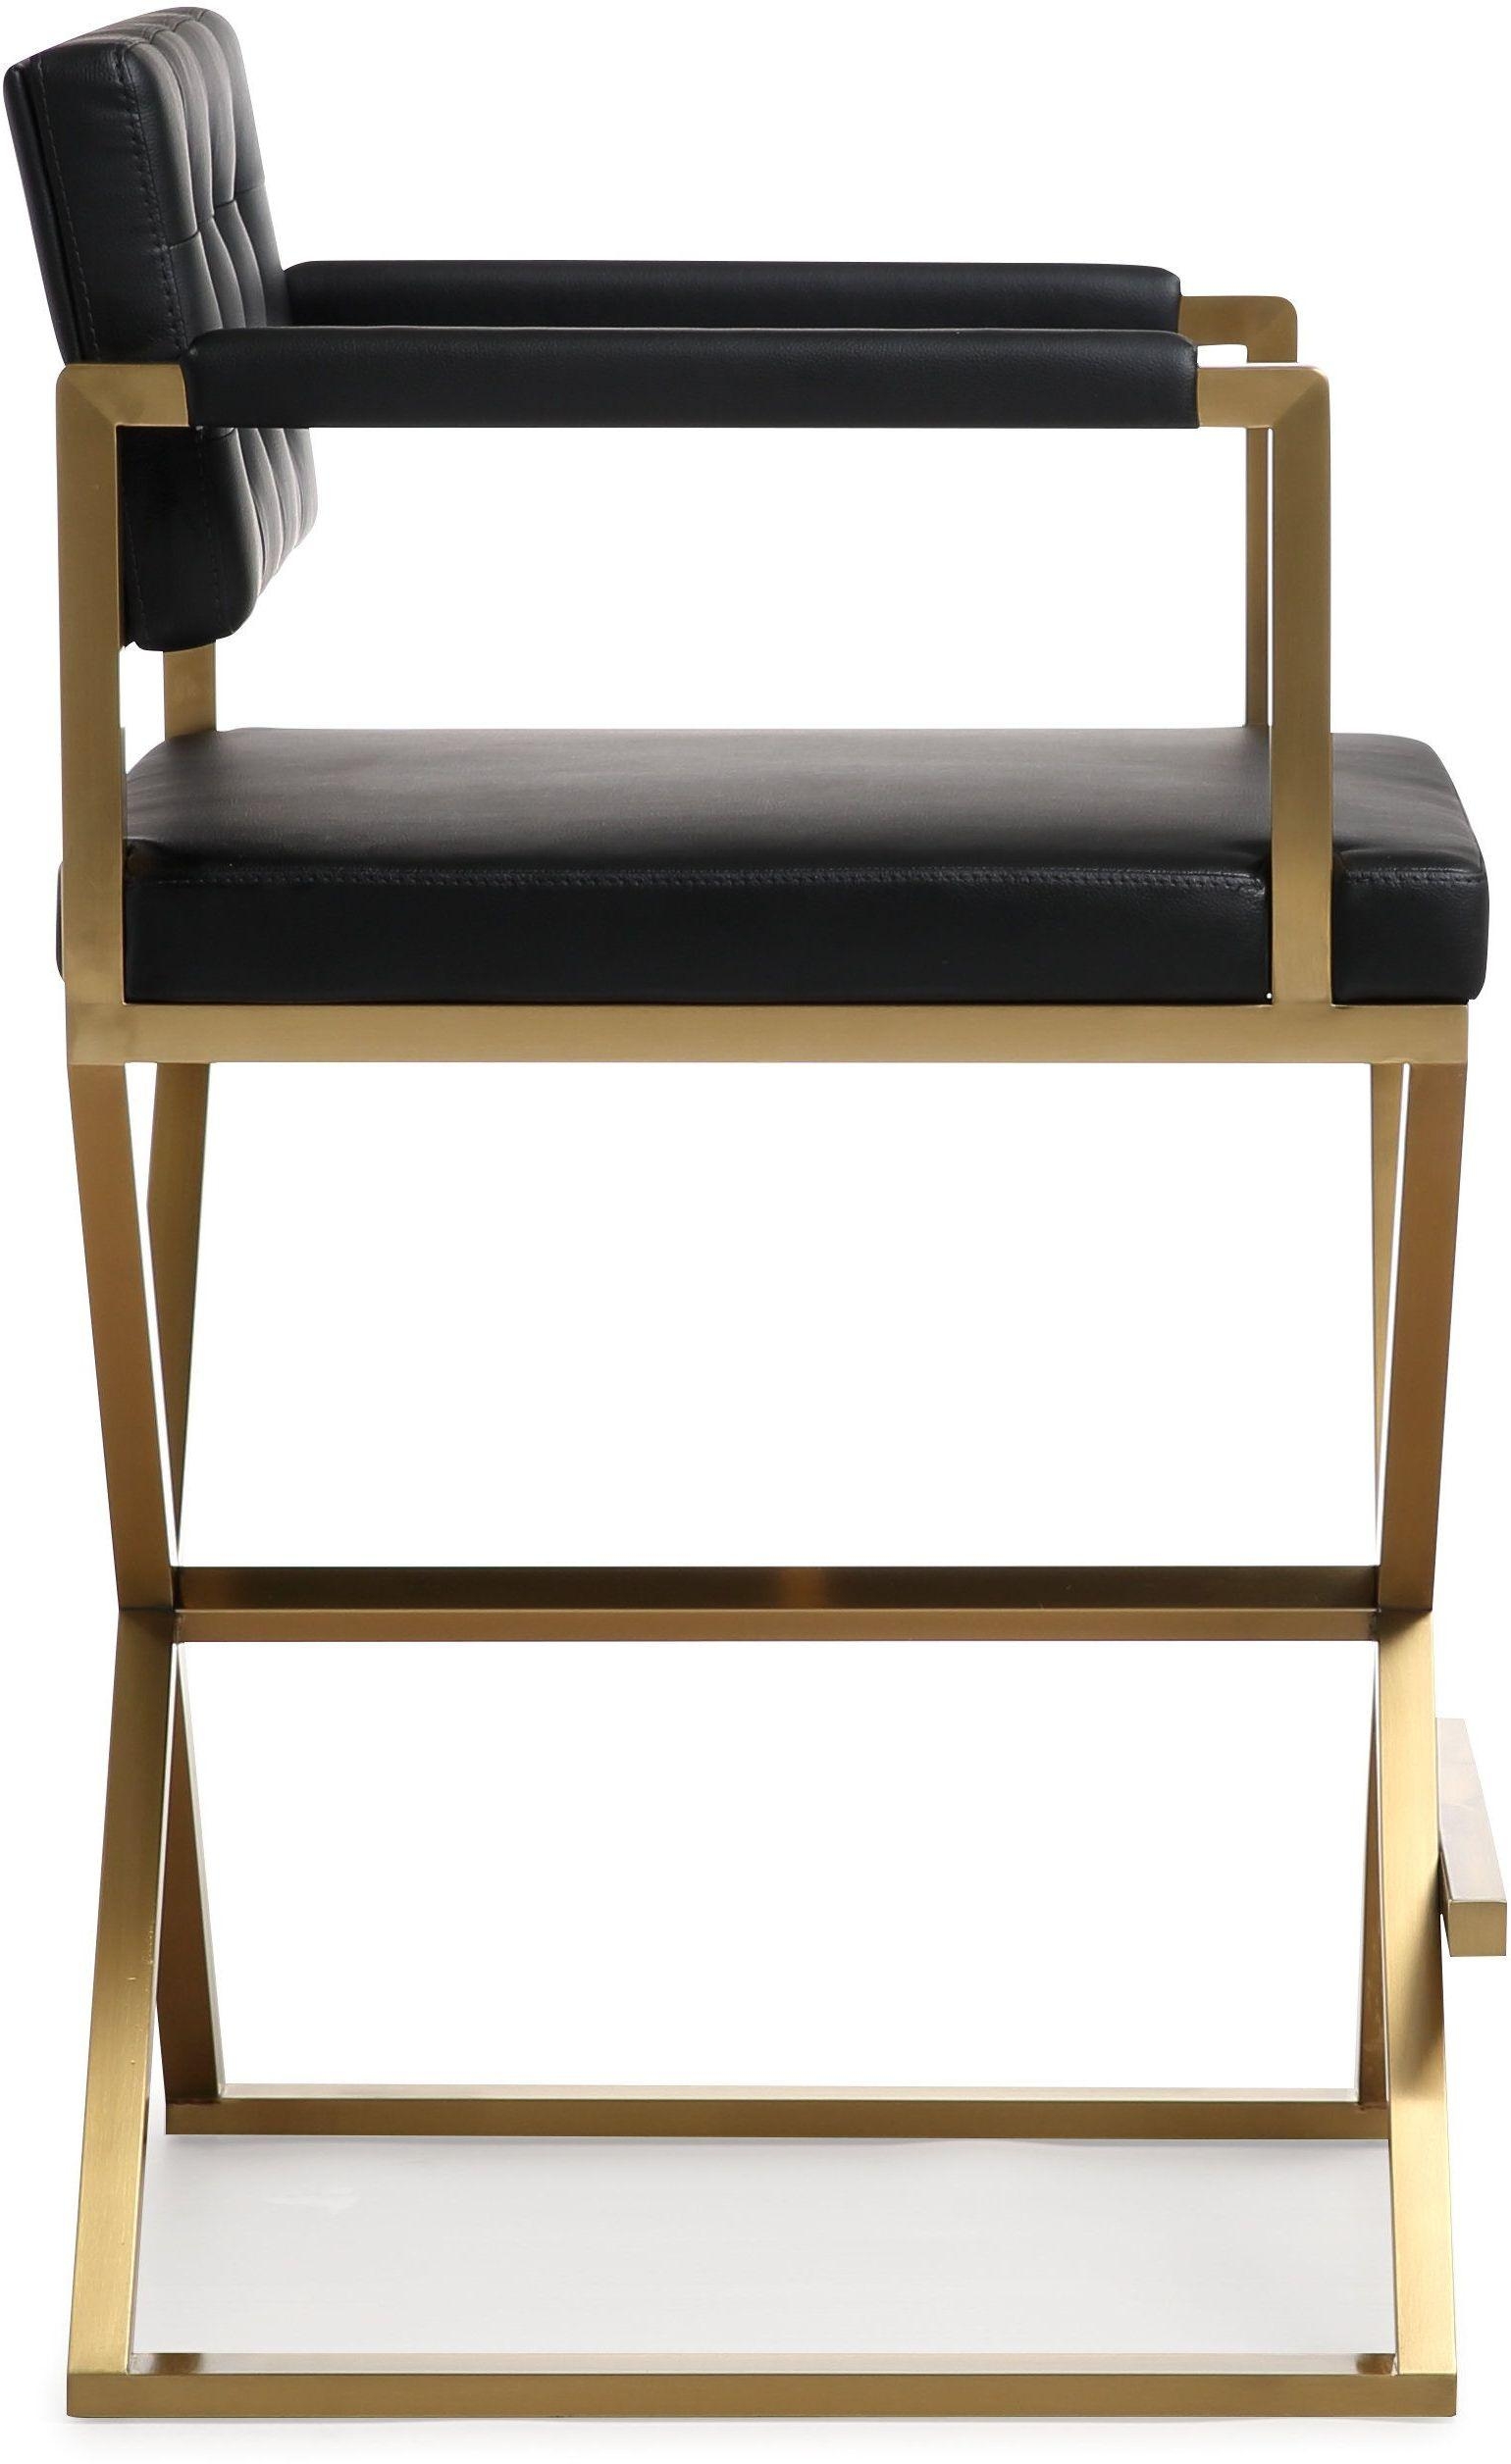 Director Black Gold Steel Counter Stool - Image 2